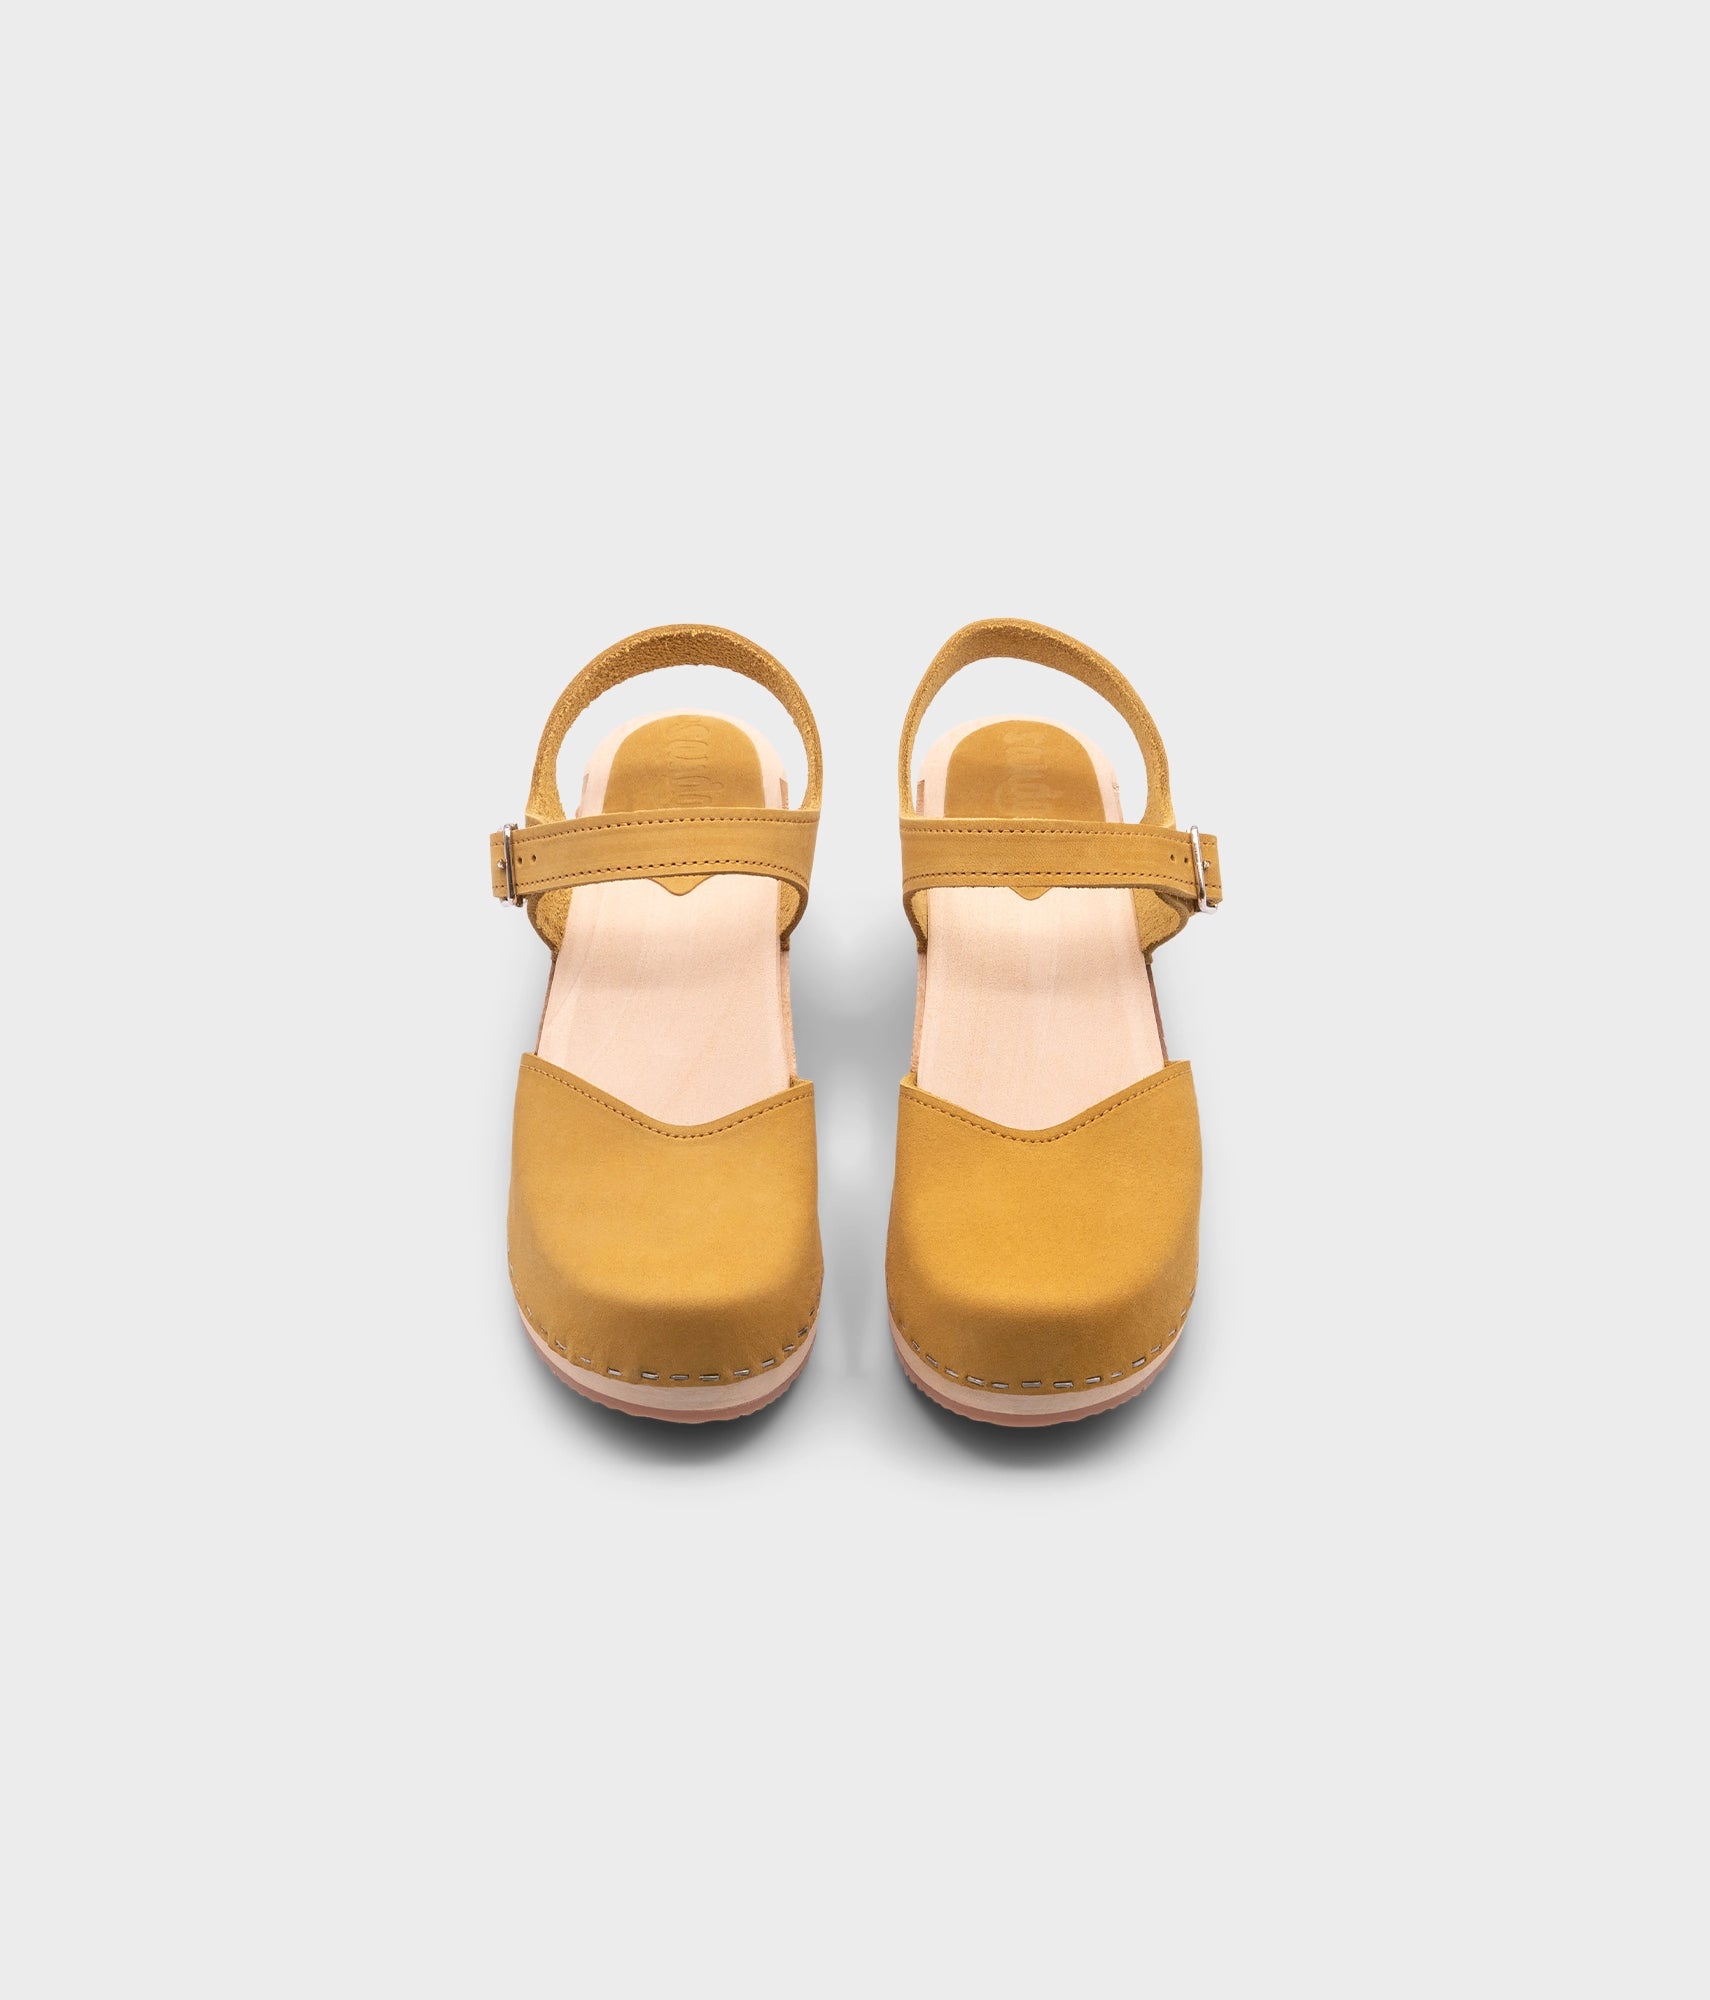 high-heeled clog sandals with a closed toe in yellow leather stapled on a light wooden base